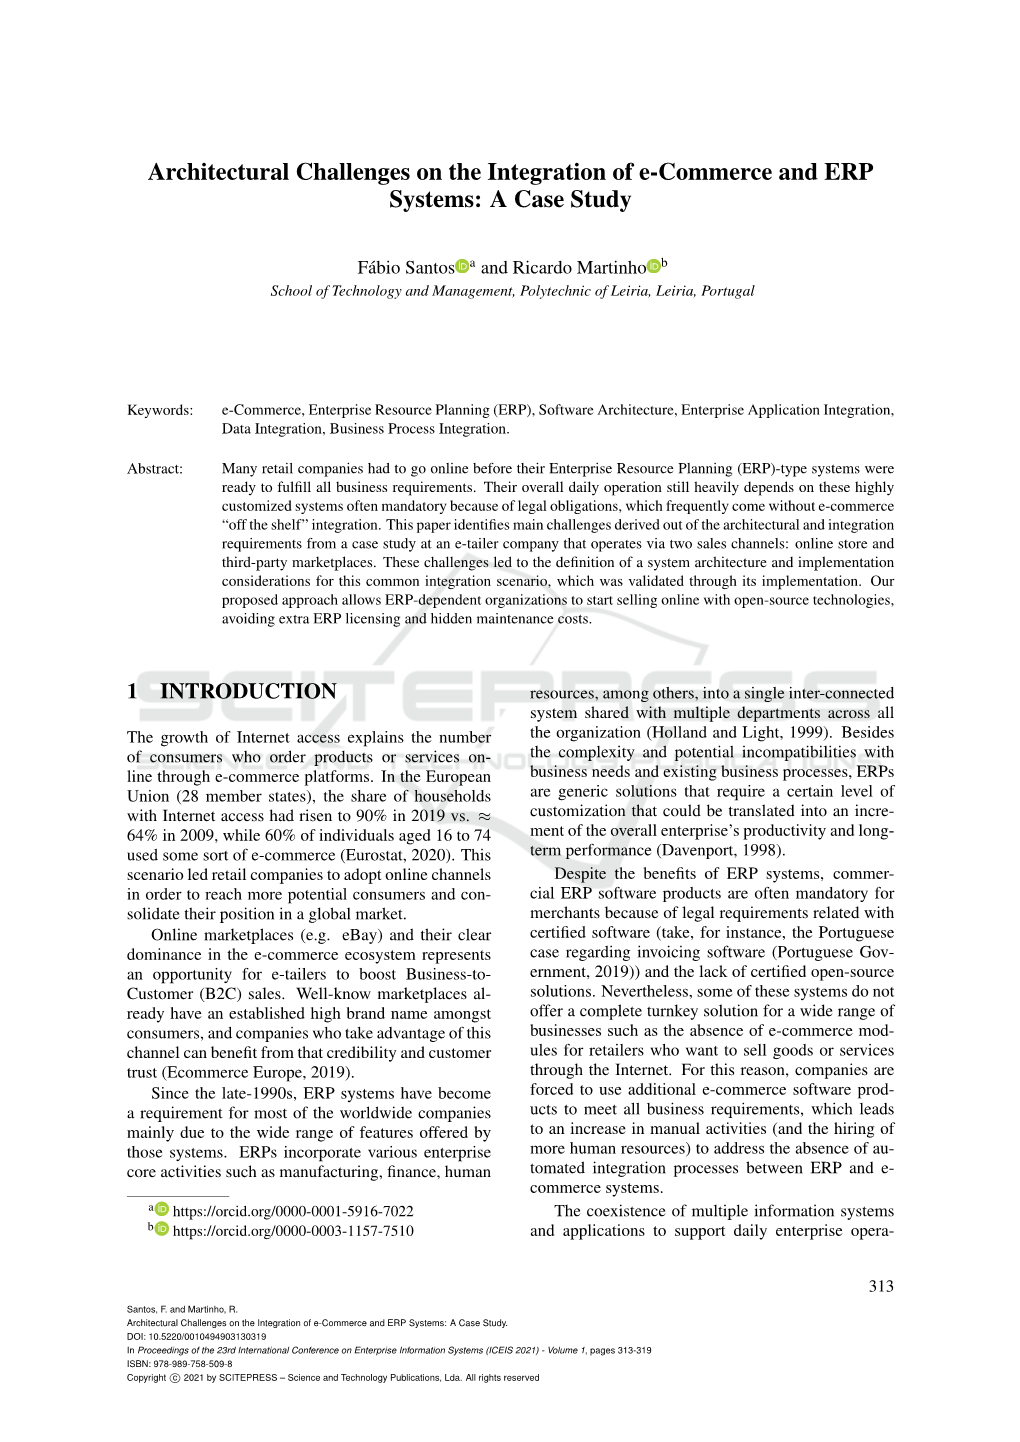 Architectural Challenges on the Integration of E-Commerce and ERP Systems: a Case Study